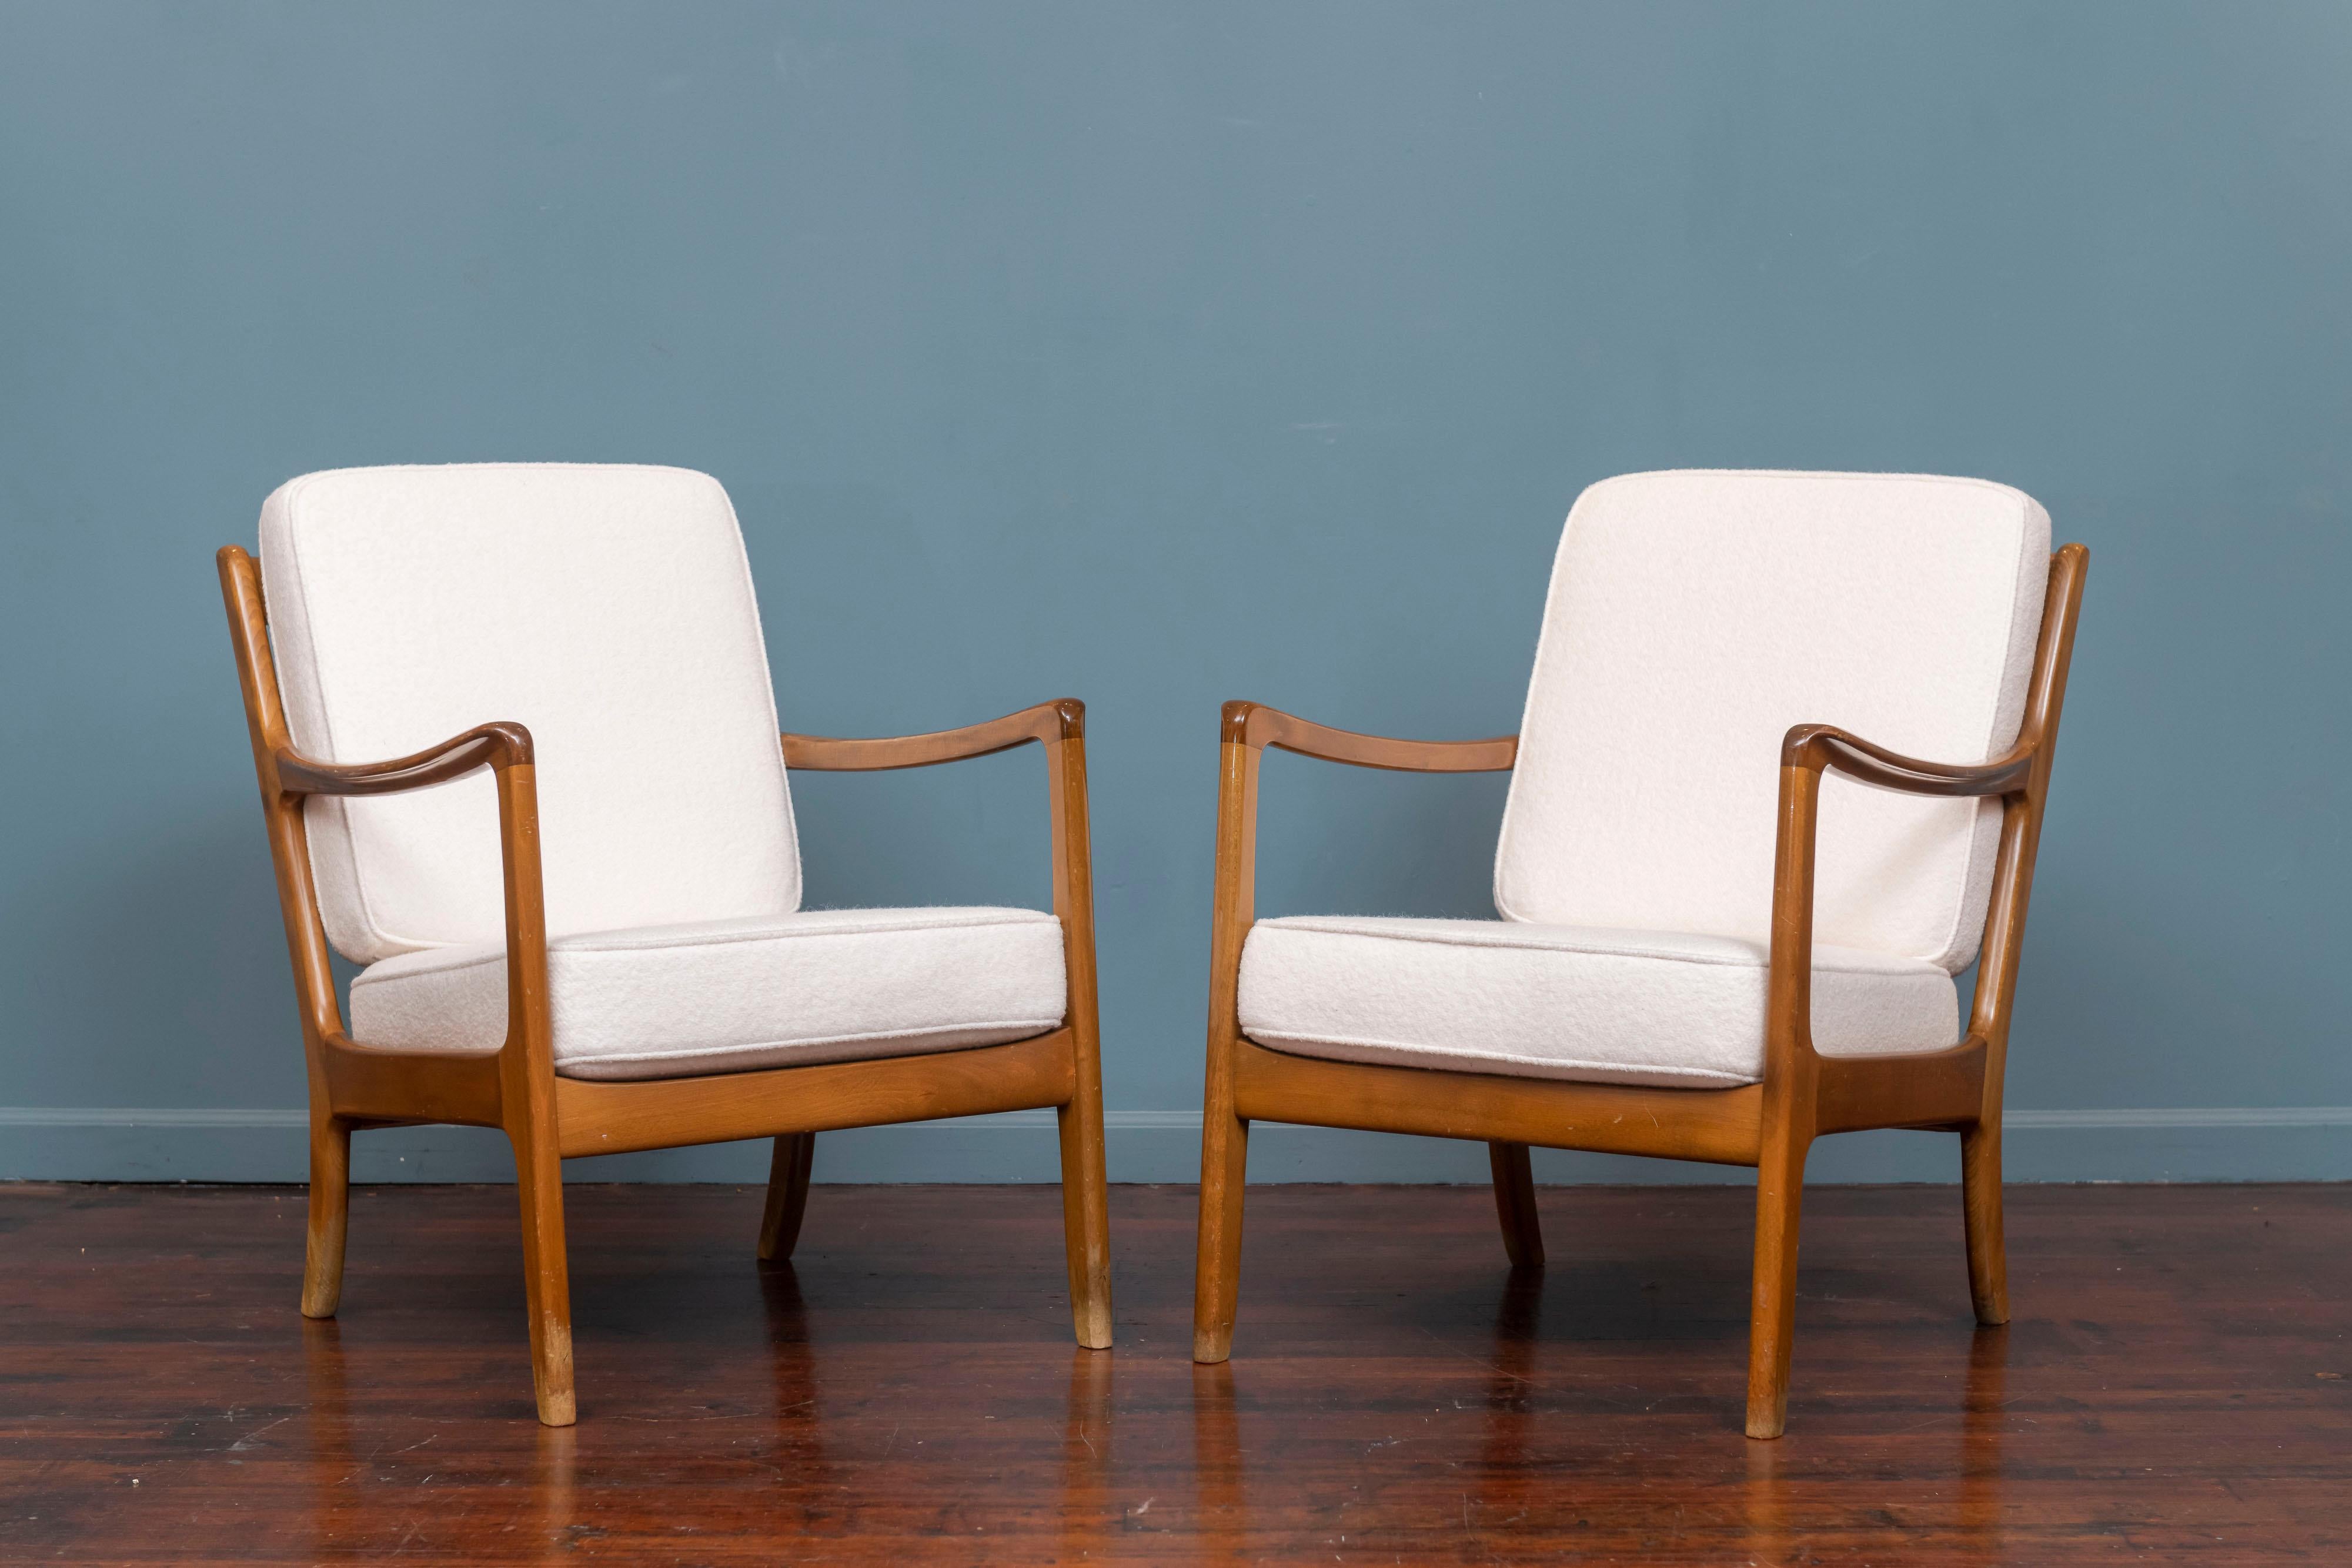 Ole Wanscher design lounge chairs for France and Daverkosen, Denmark. 
Newly upholstered in a white boucle with new foam cushions, these light wood frames are in good shape with some wear to the finish. Comfortable, casual and ready to be enjoyed.